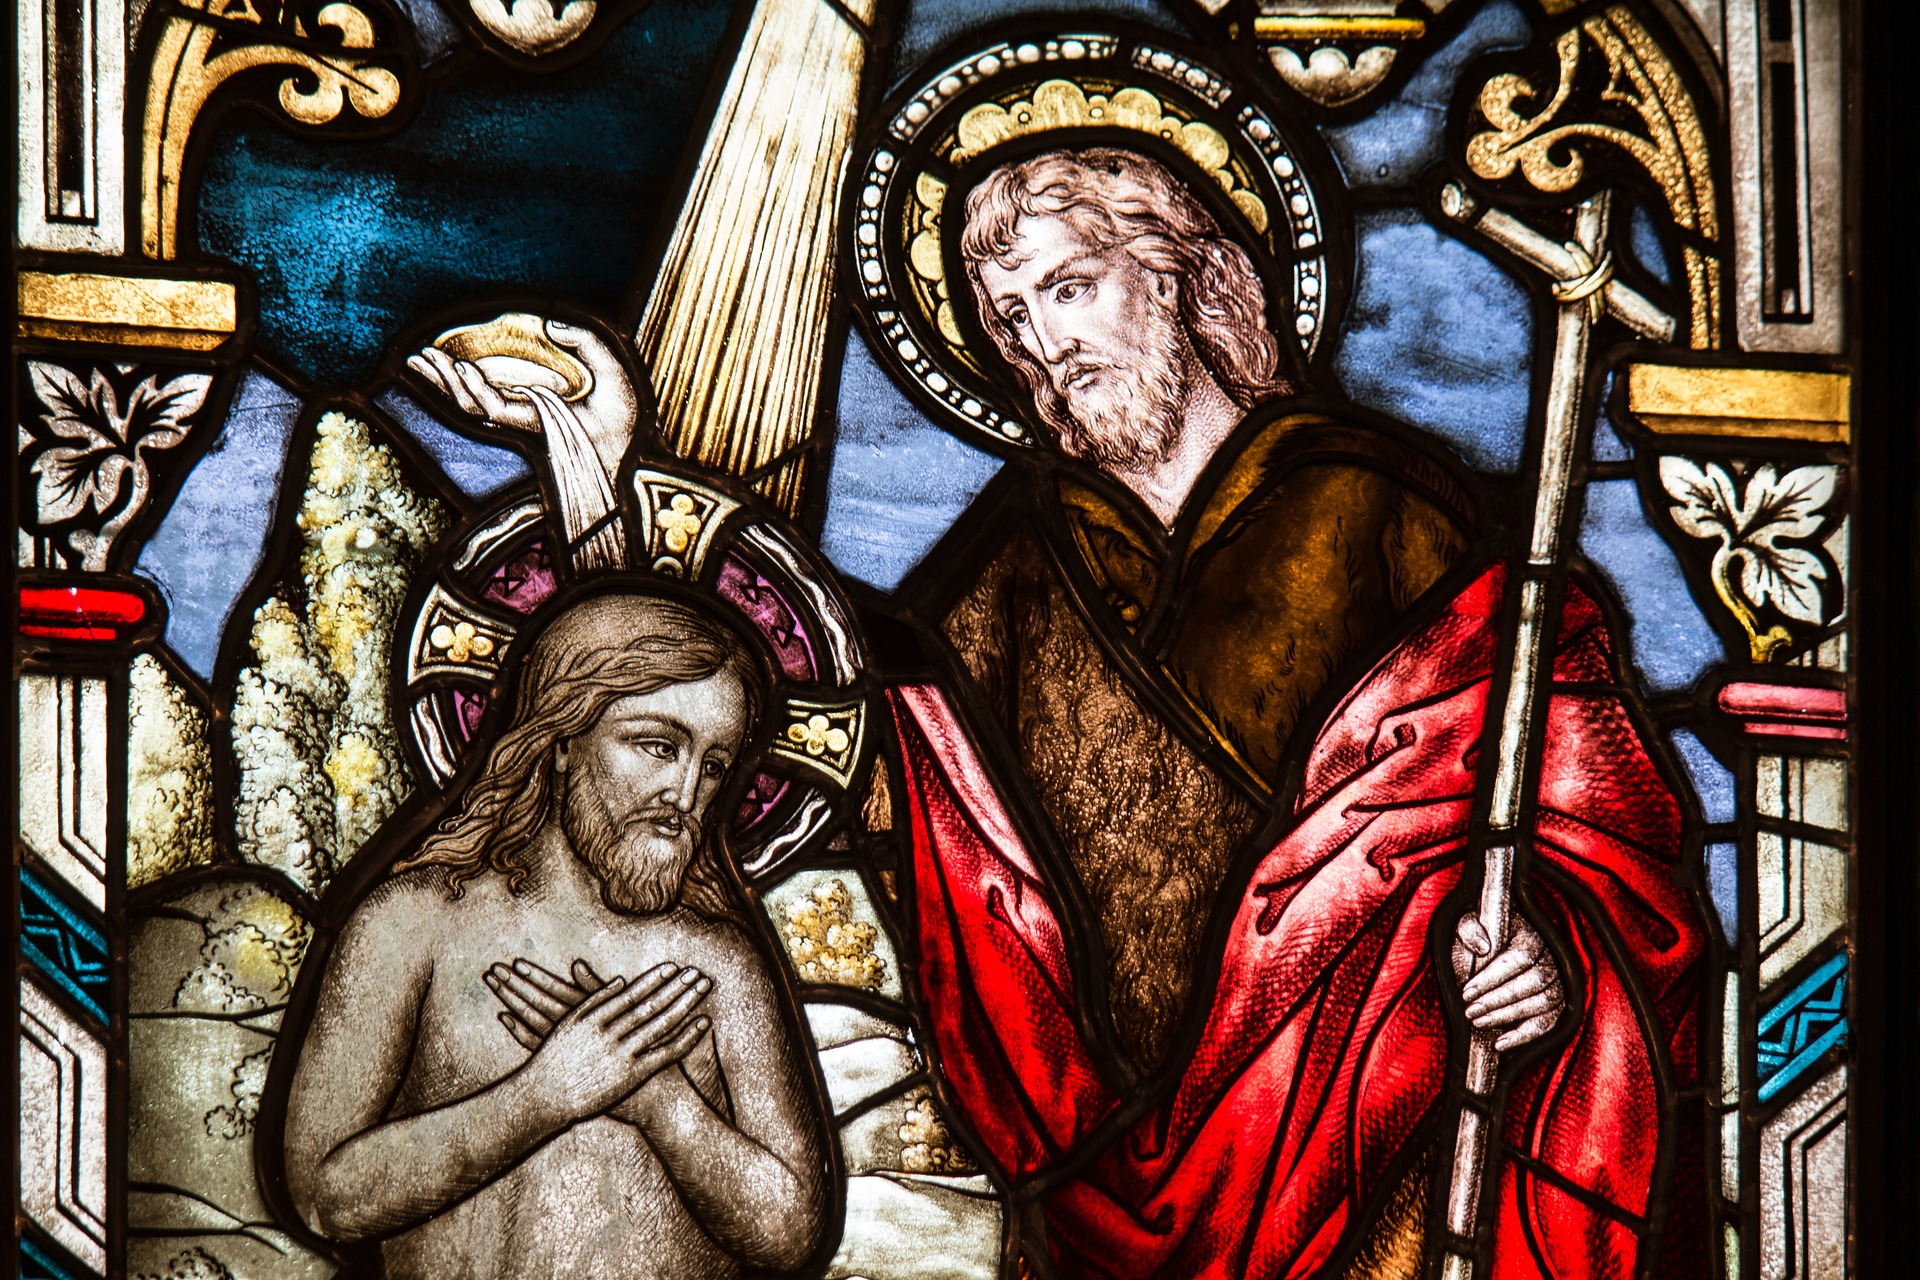 Baptism of Christ in a stained glass window